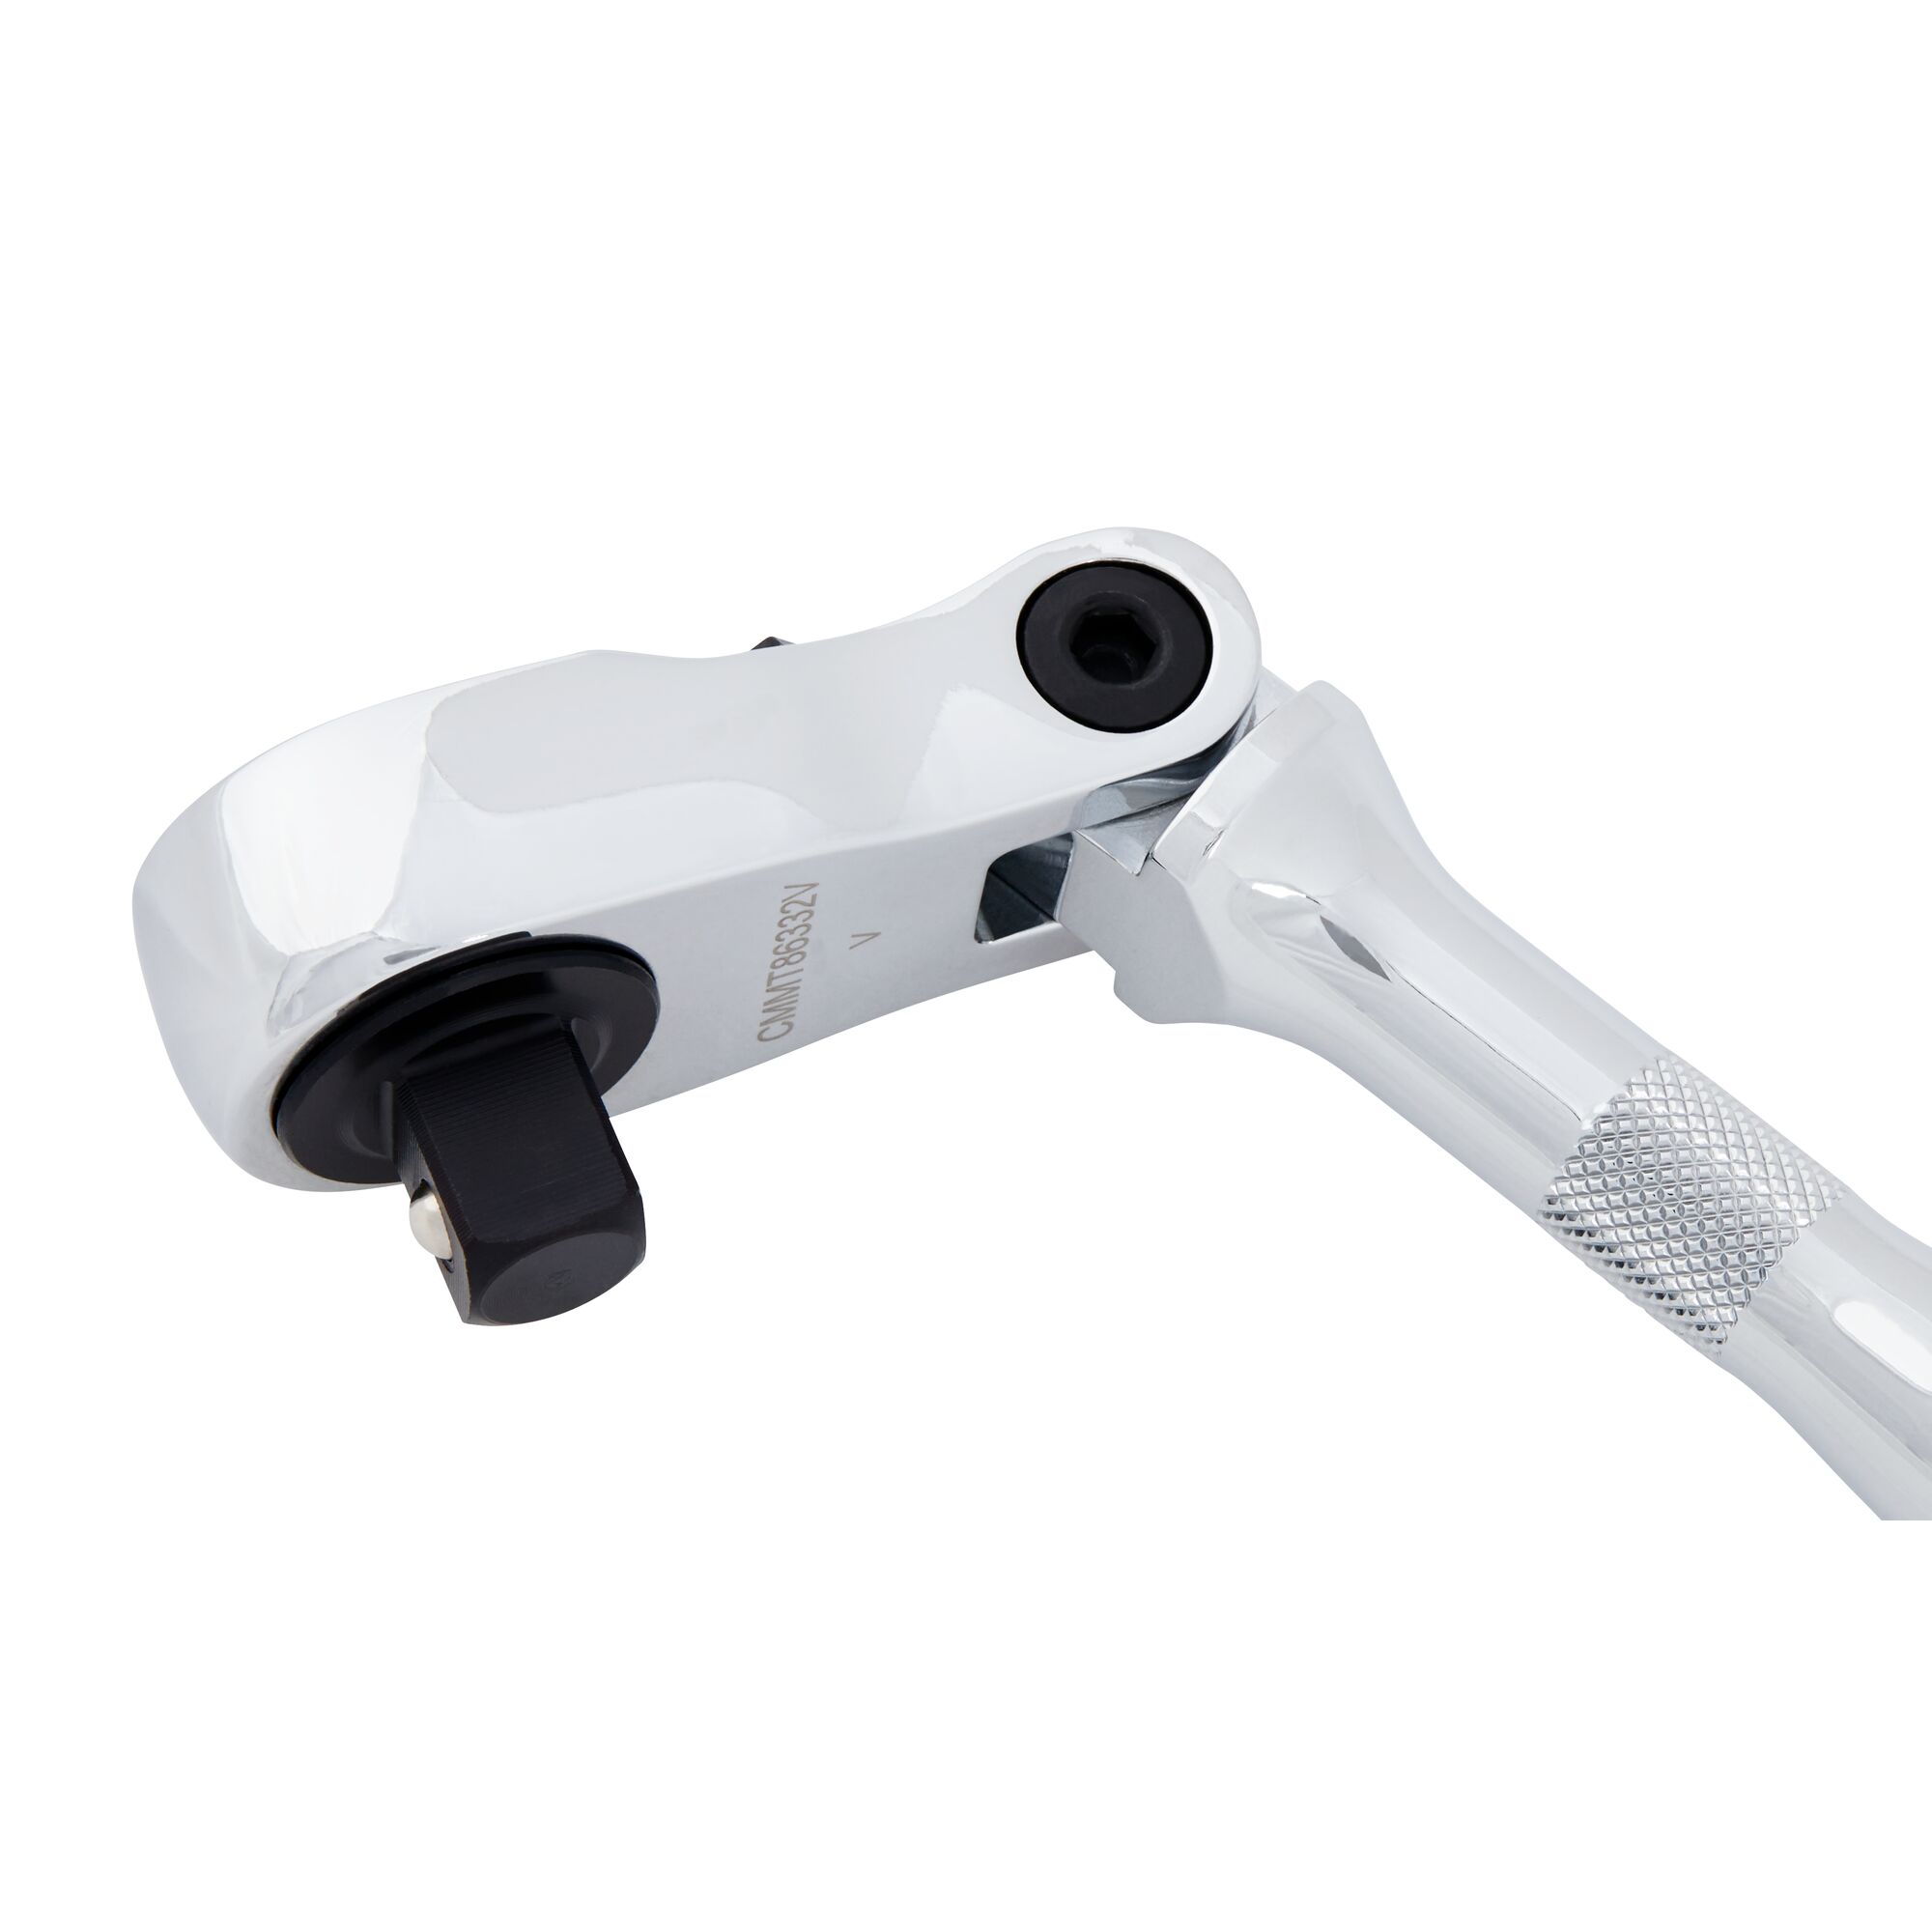 180 degrees articulating head feature in V series half inch drive flex head ratchet.